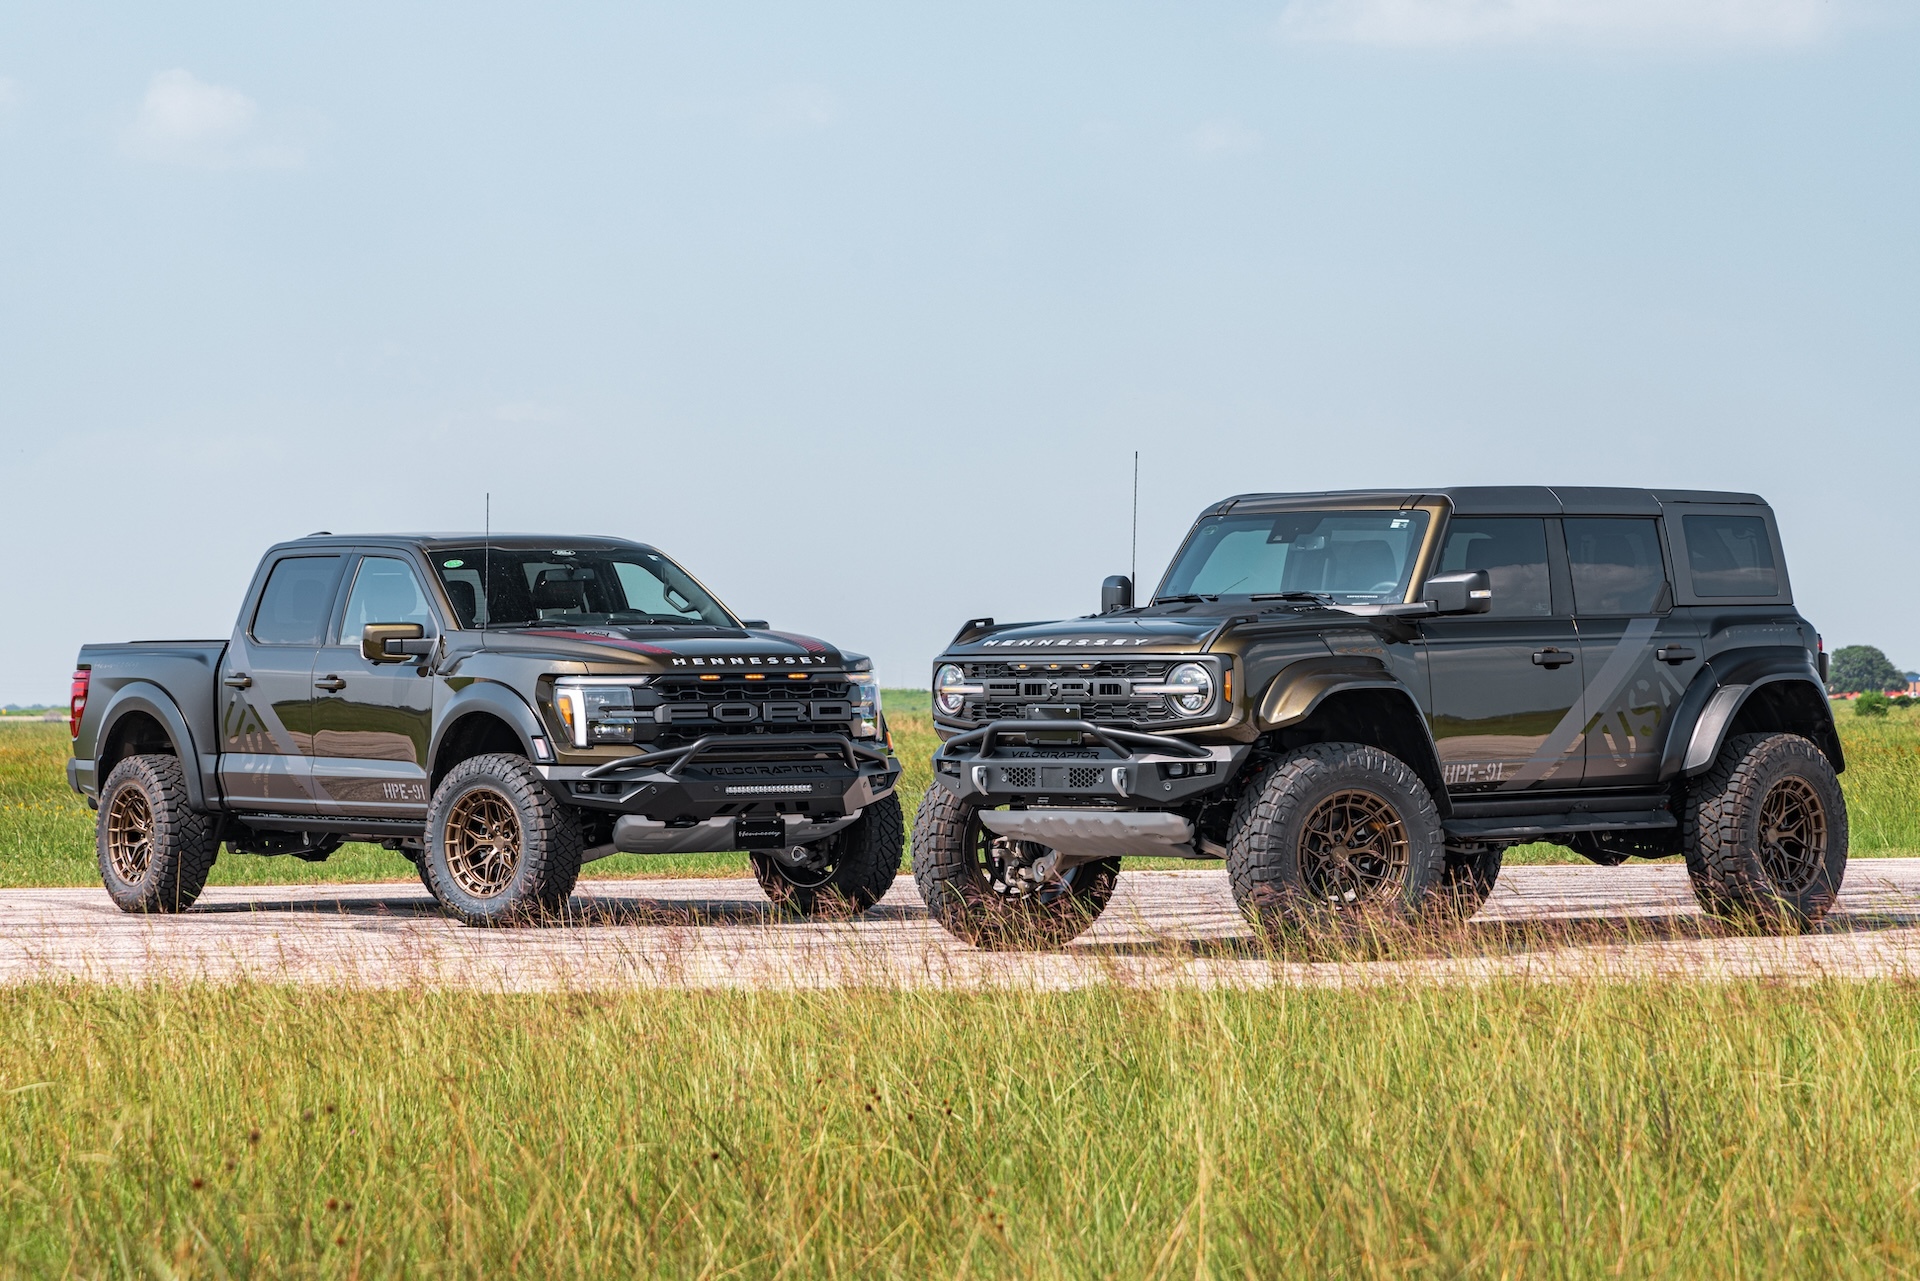 Hennessey made “charged” SUVs in honor of US independence